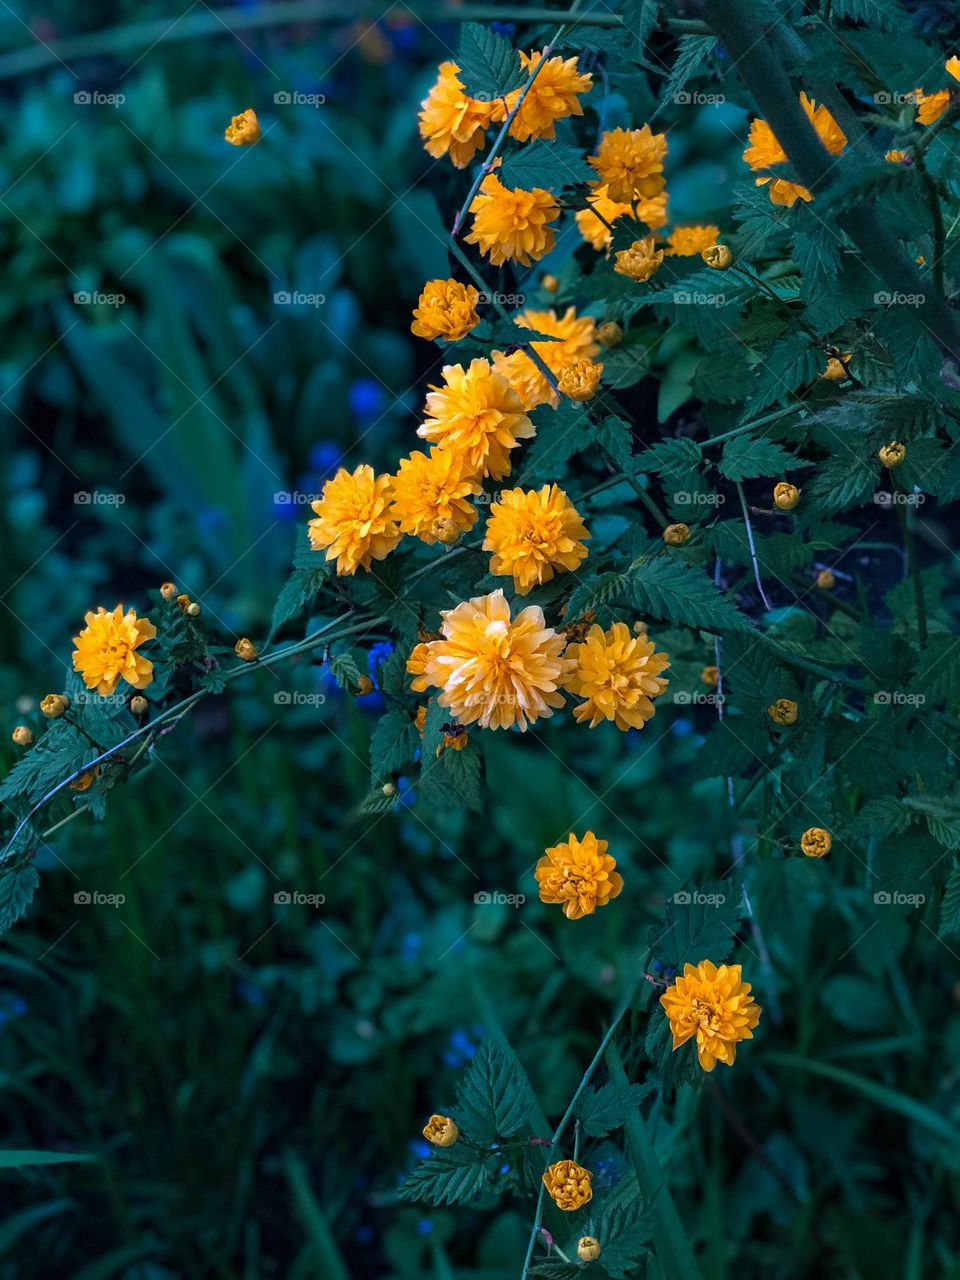 Green leaves, yellow and blue flowers